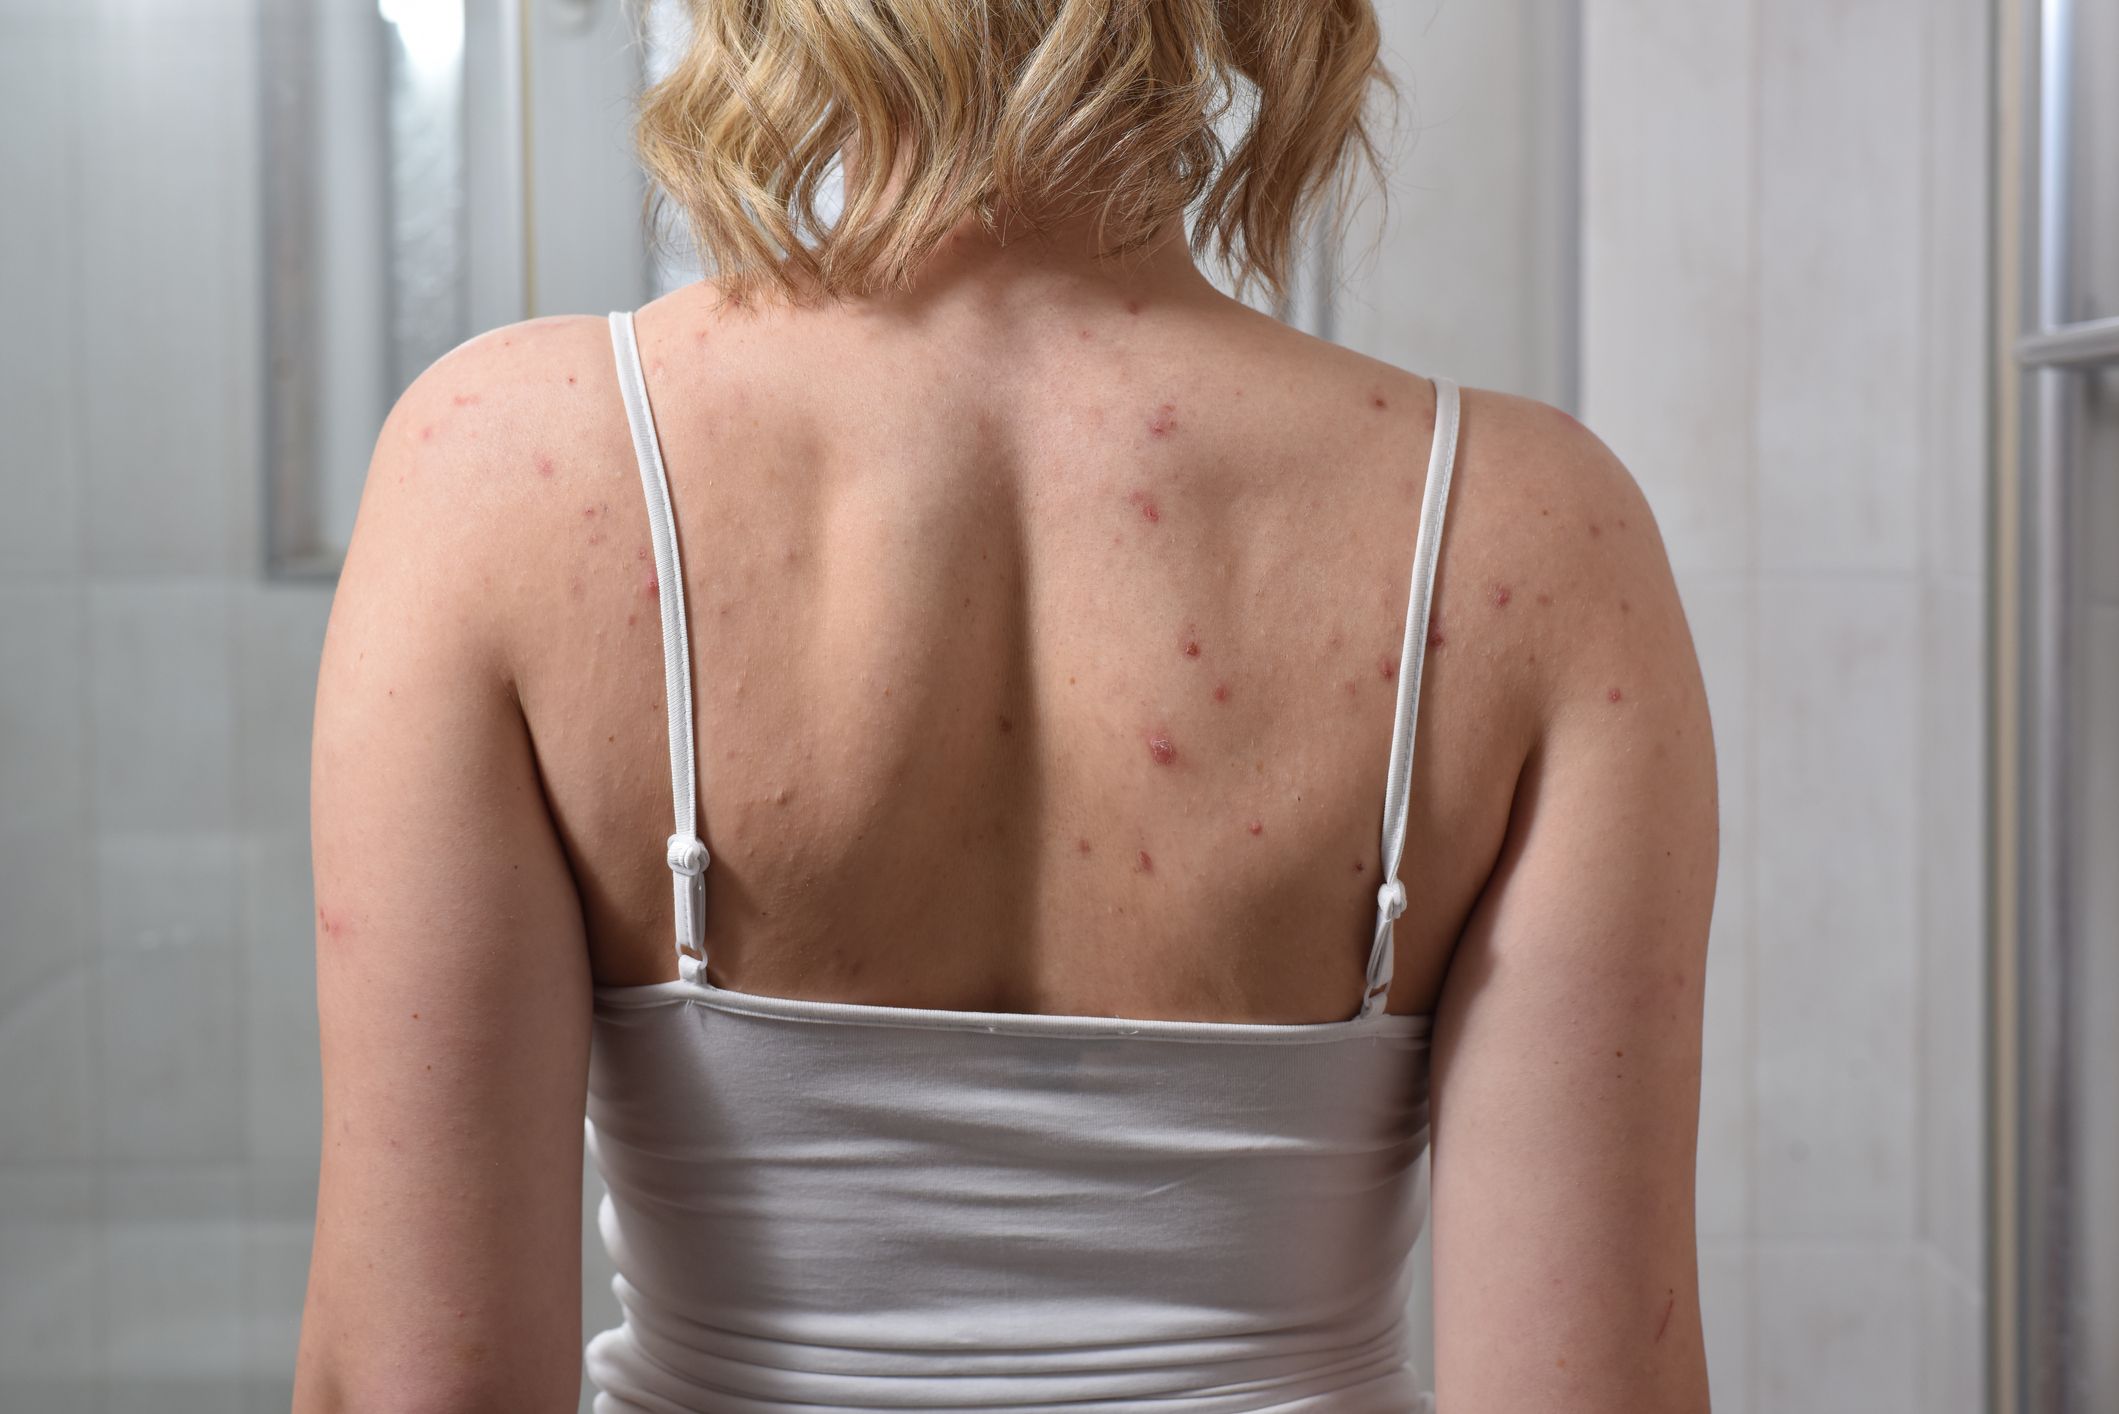 How to Get Rid of Back Acne, According to Dermatologists